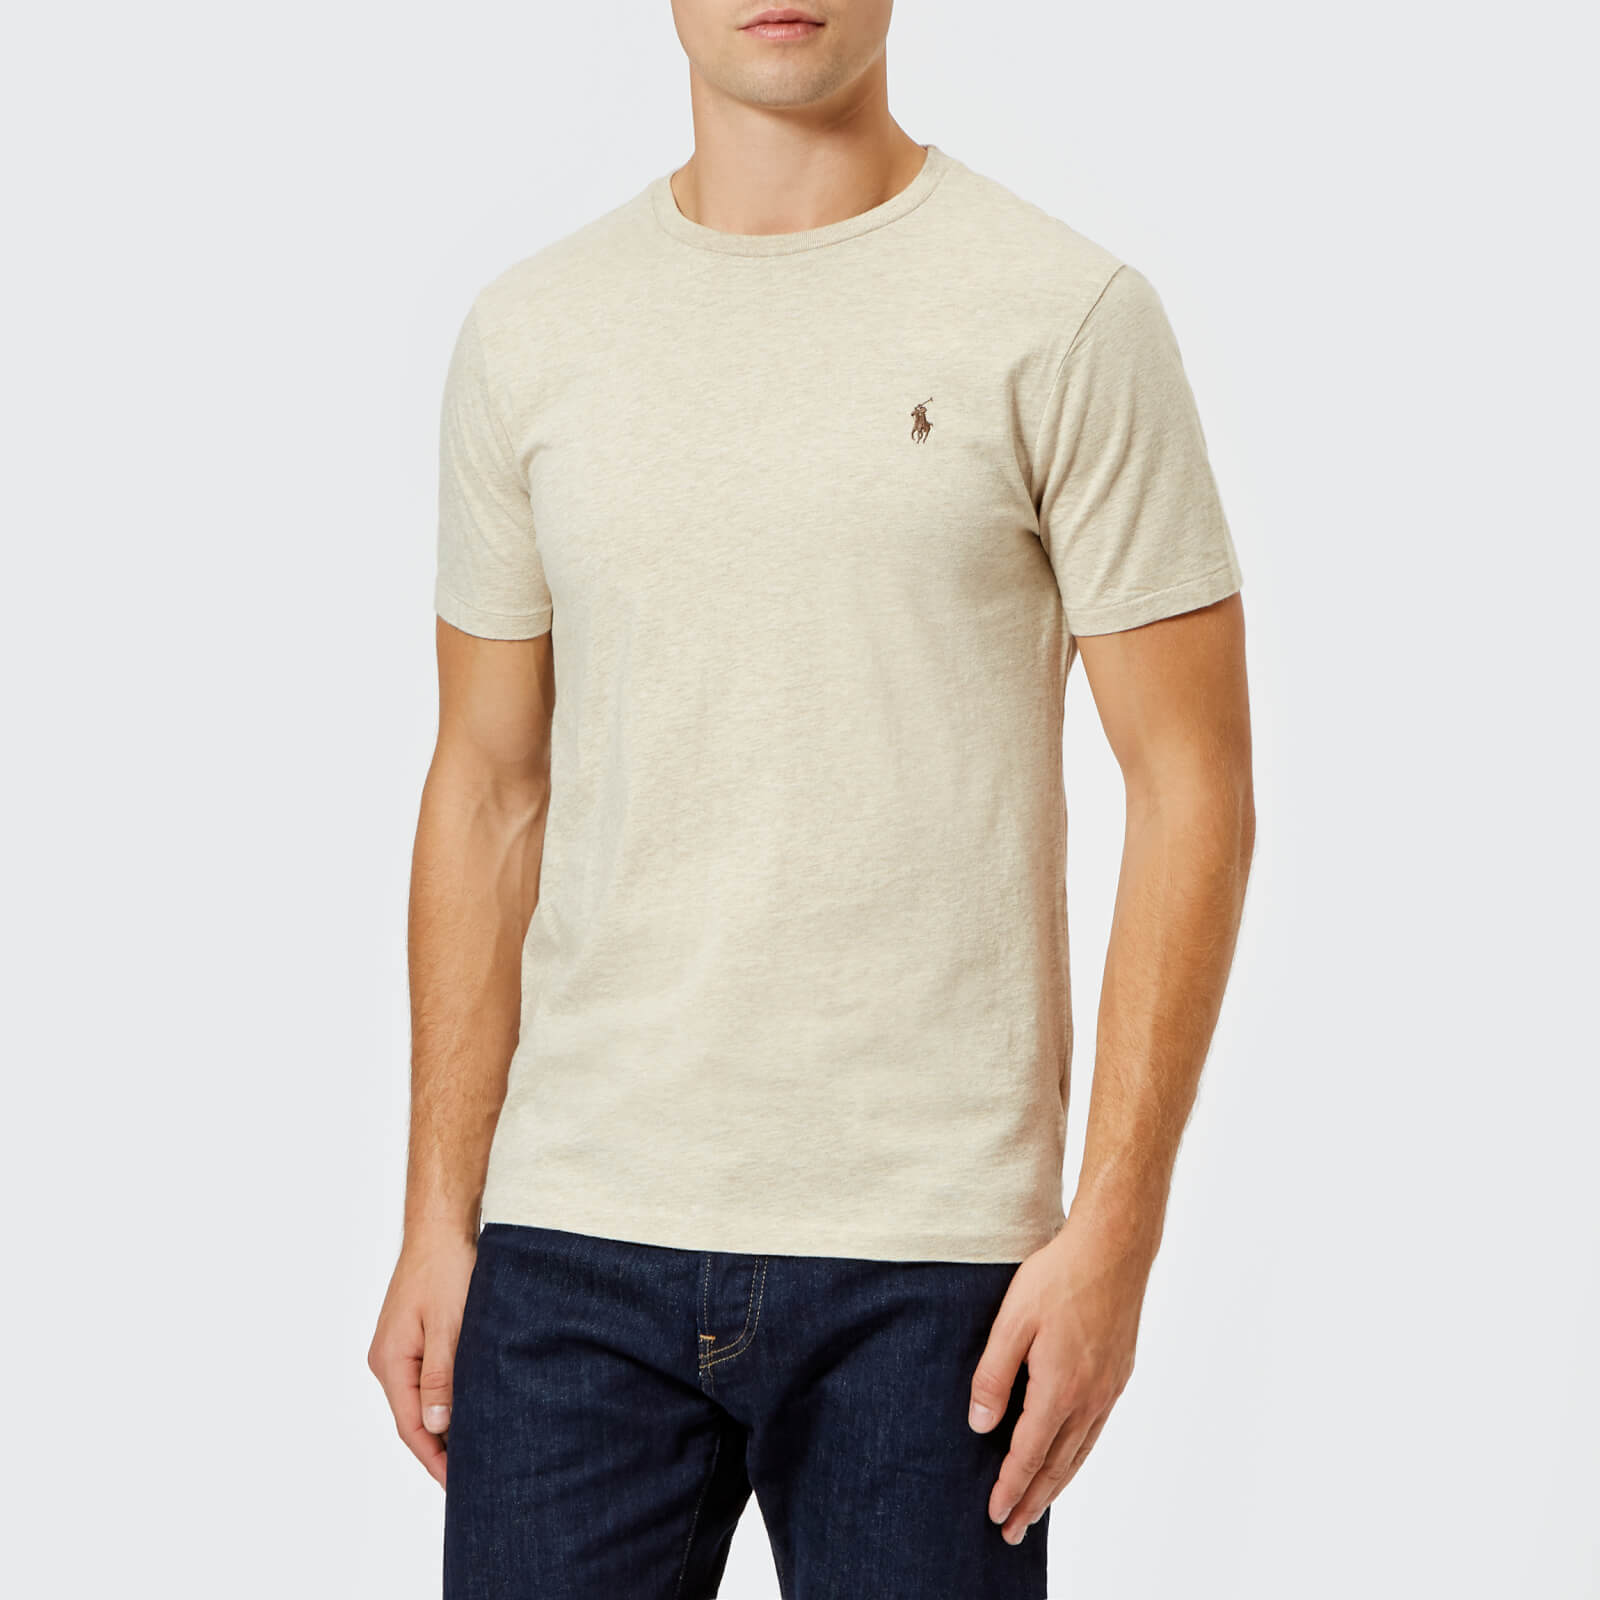 expedition dune heather polo